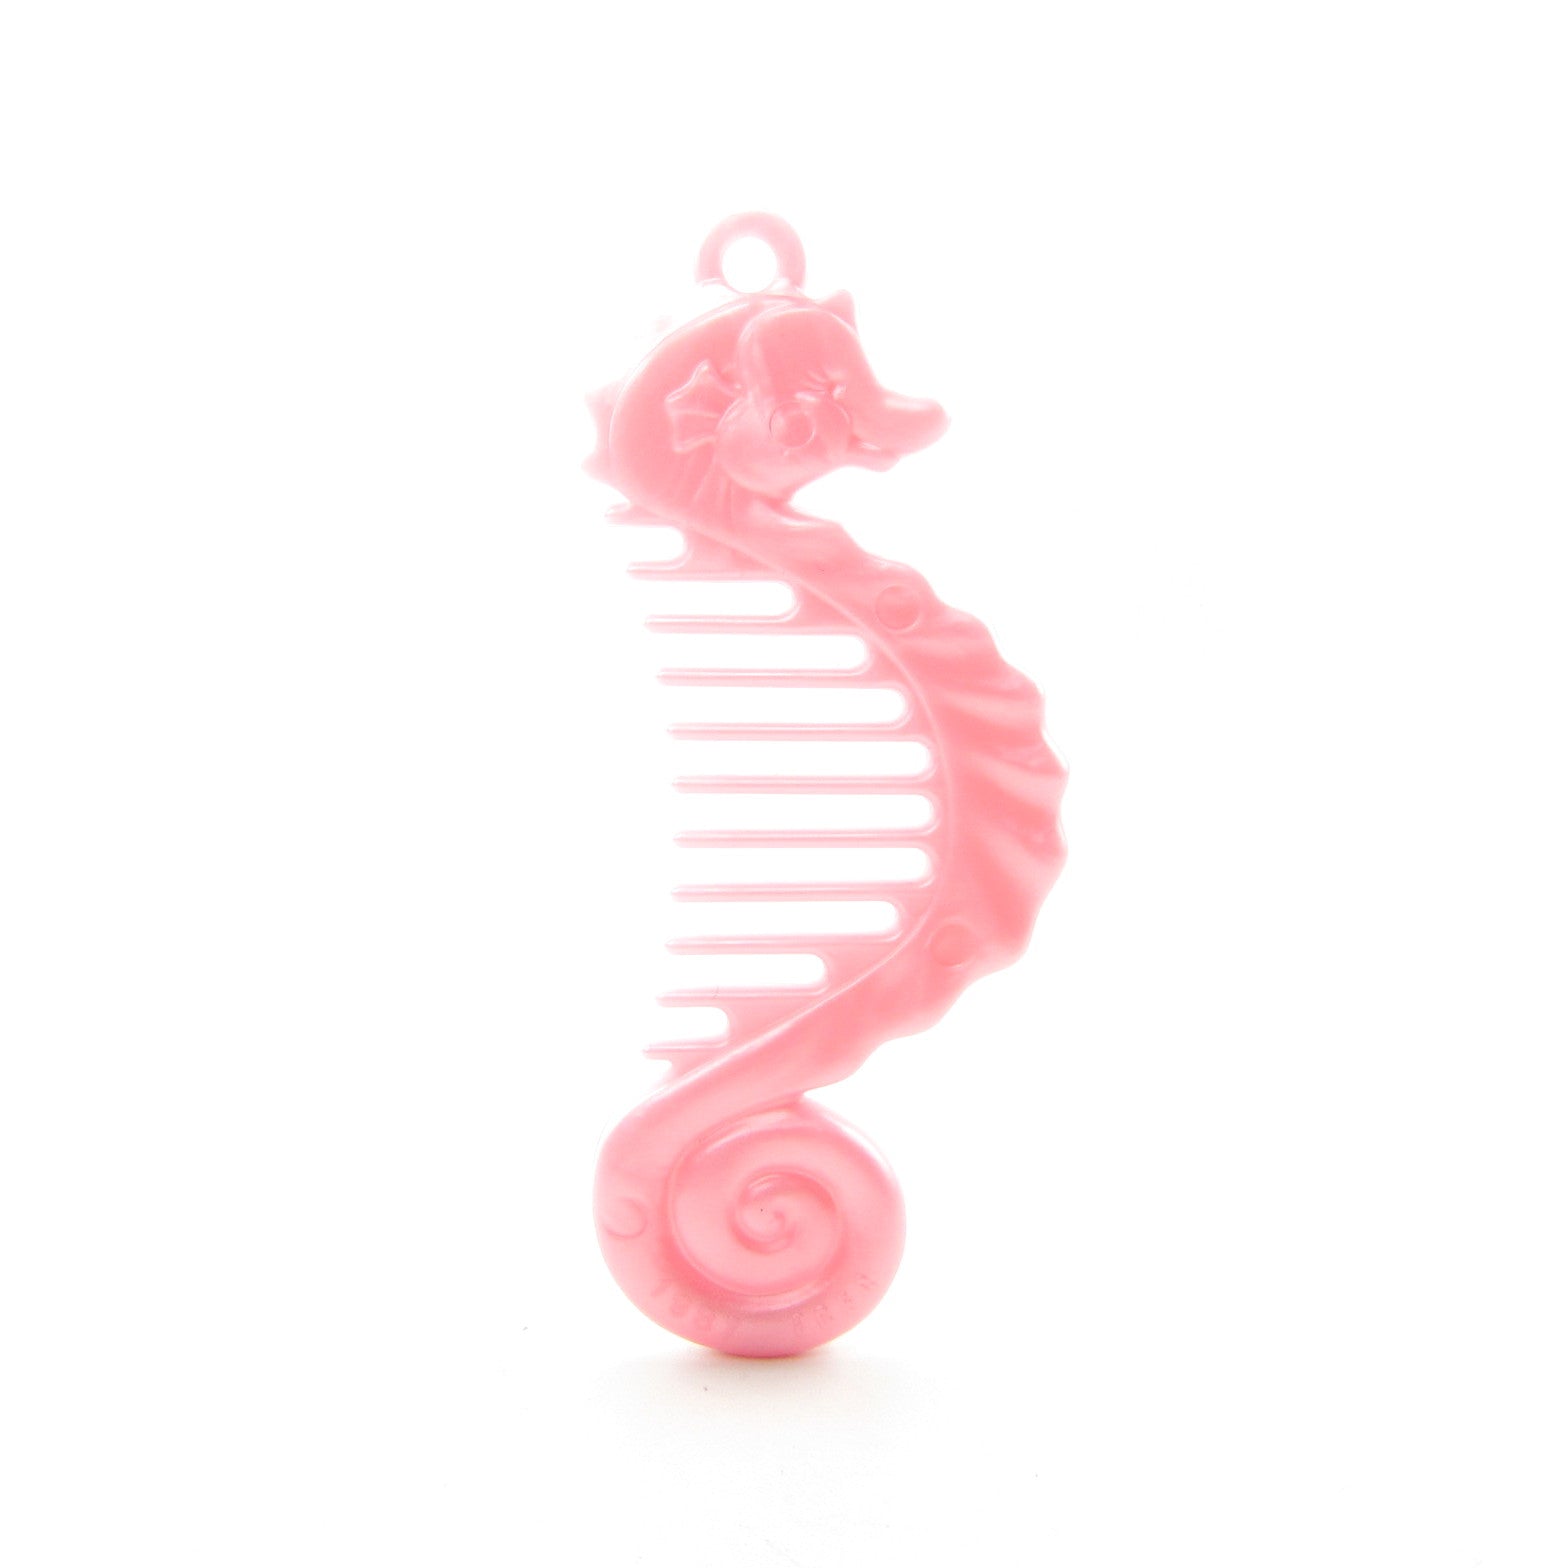 Pink seahorse hair comb from Lady LovelyLocks Enchanted Island dolls